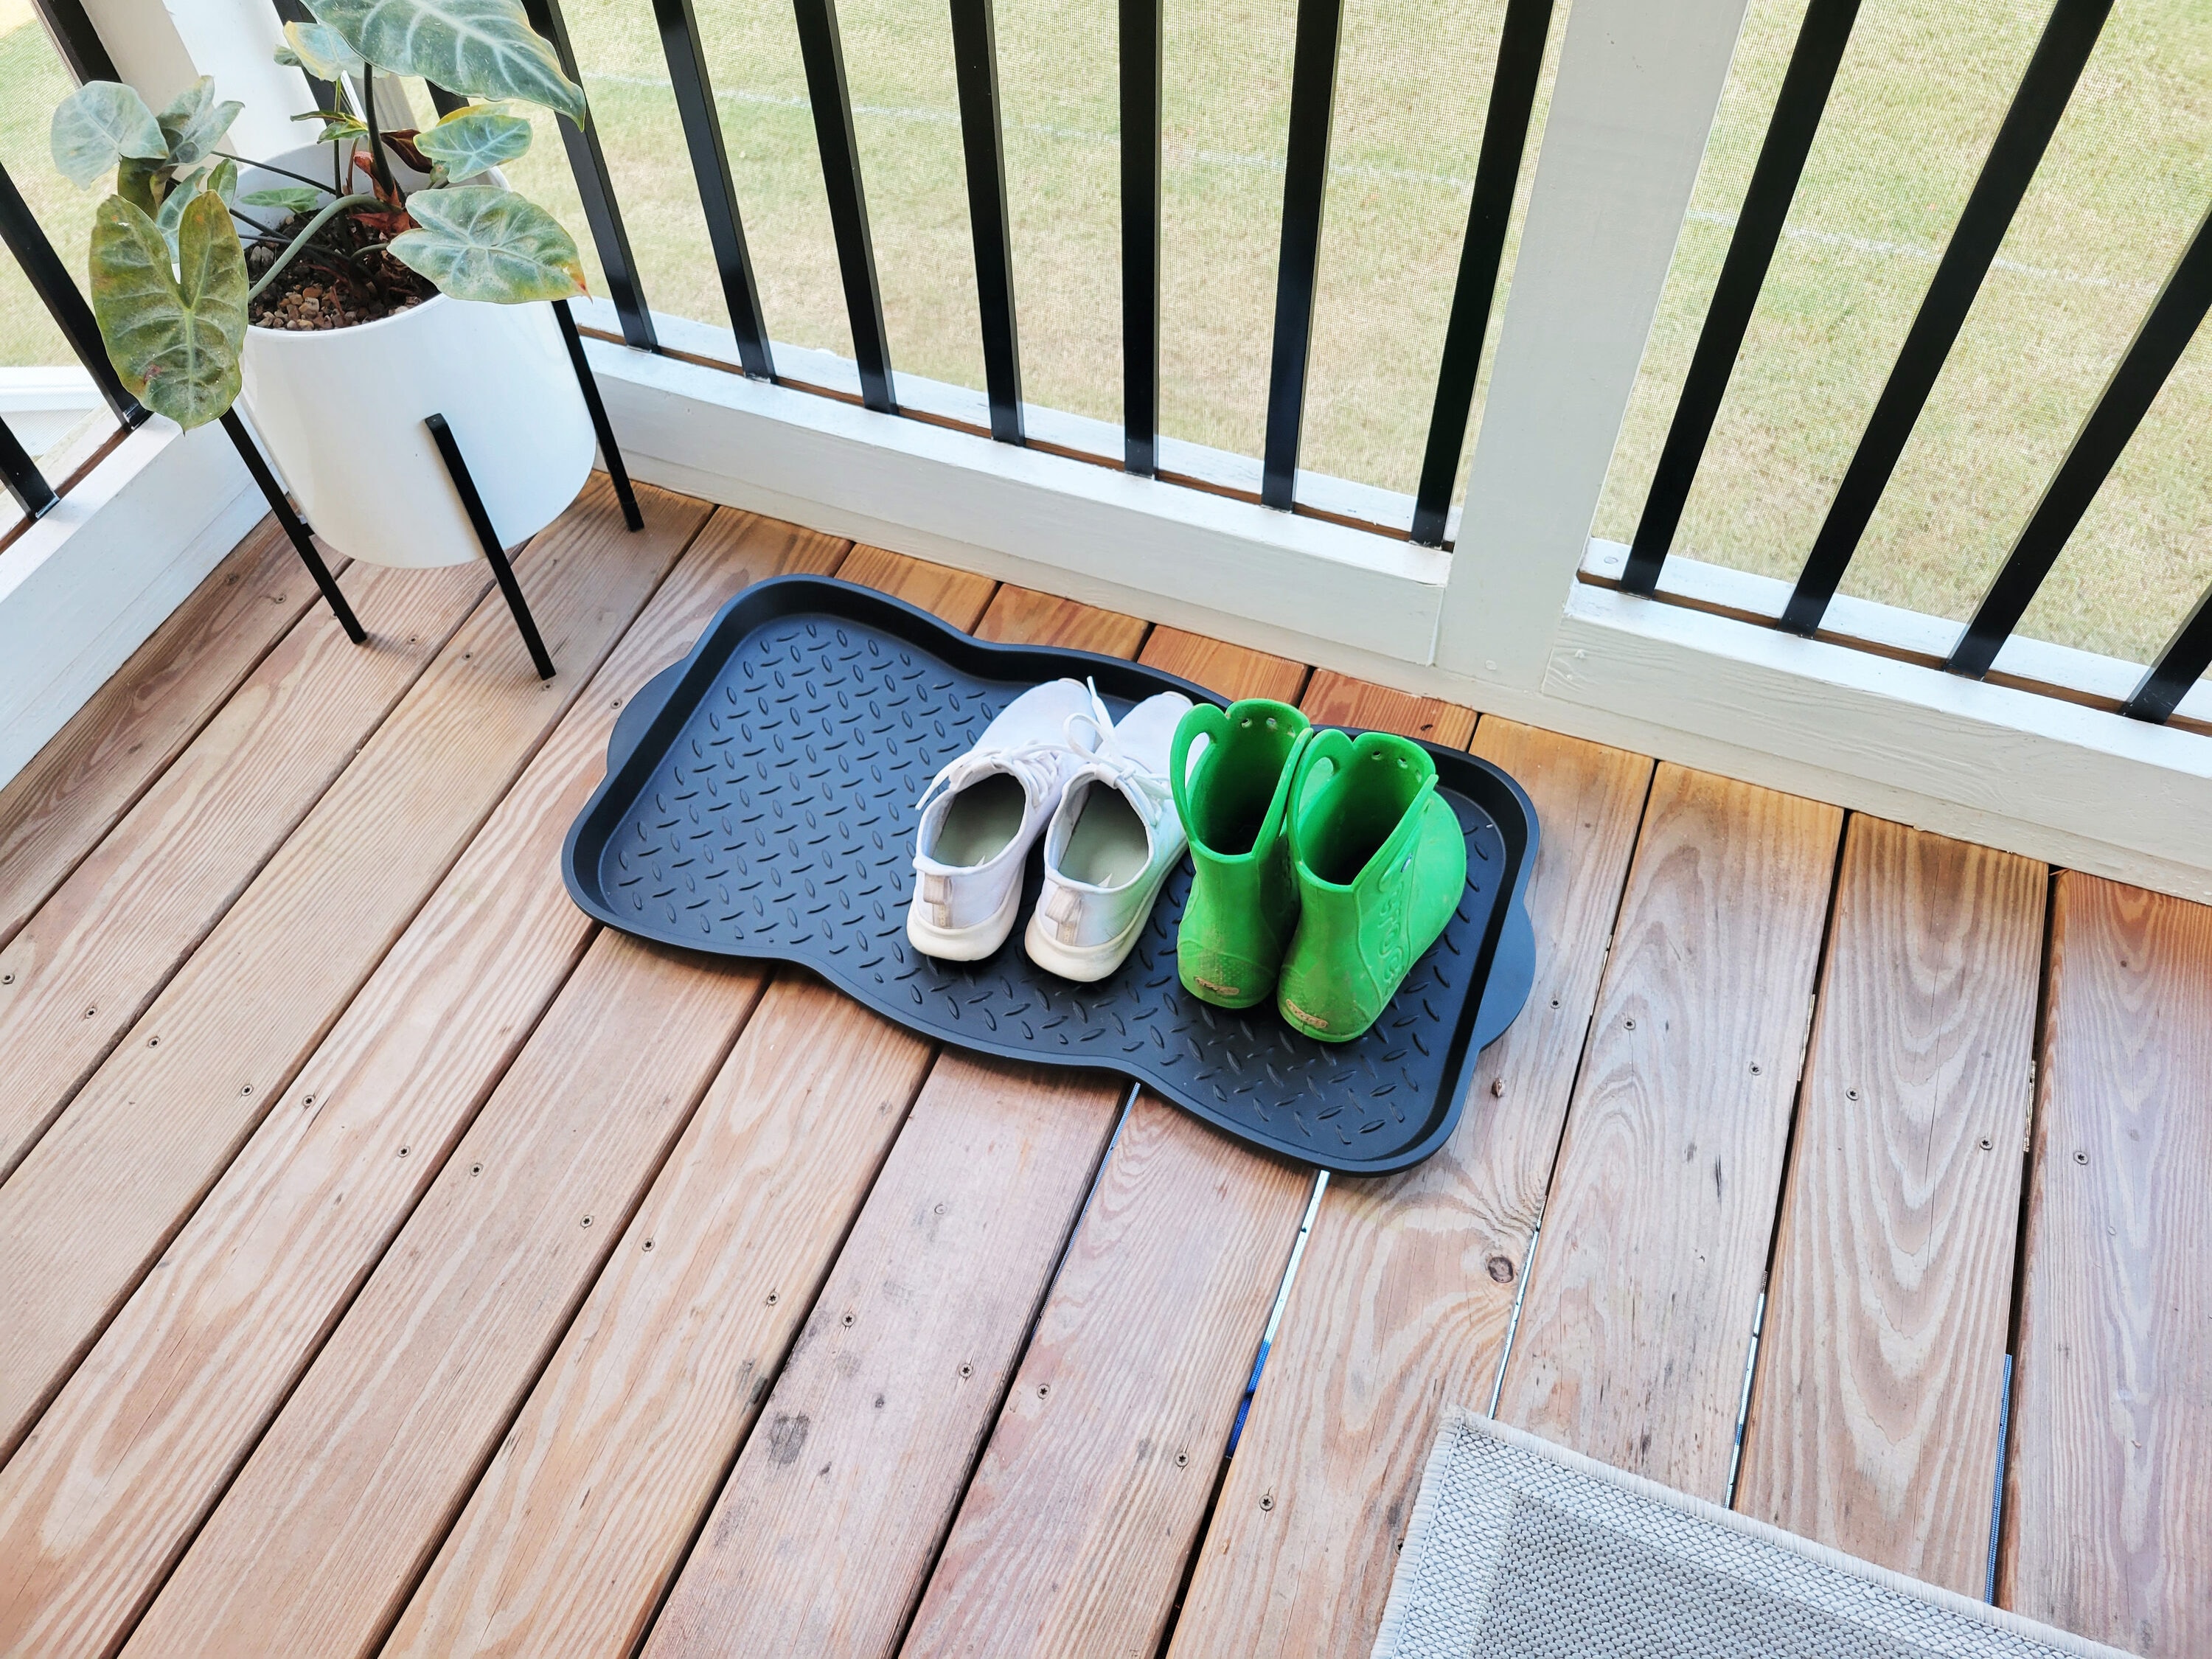 All Weather Boot Tray - Small Water-resistant Plastic Utility Shoe Mat For  Indoor And Outdoor Use In All Seasons By Stalwart (set Of Two, Dark Grey) :  Target